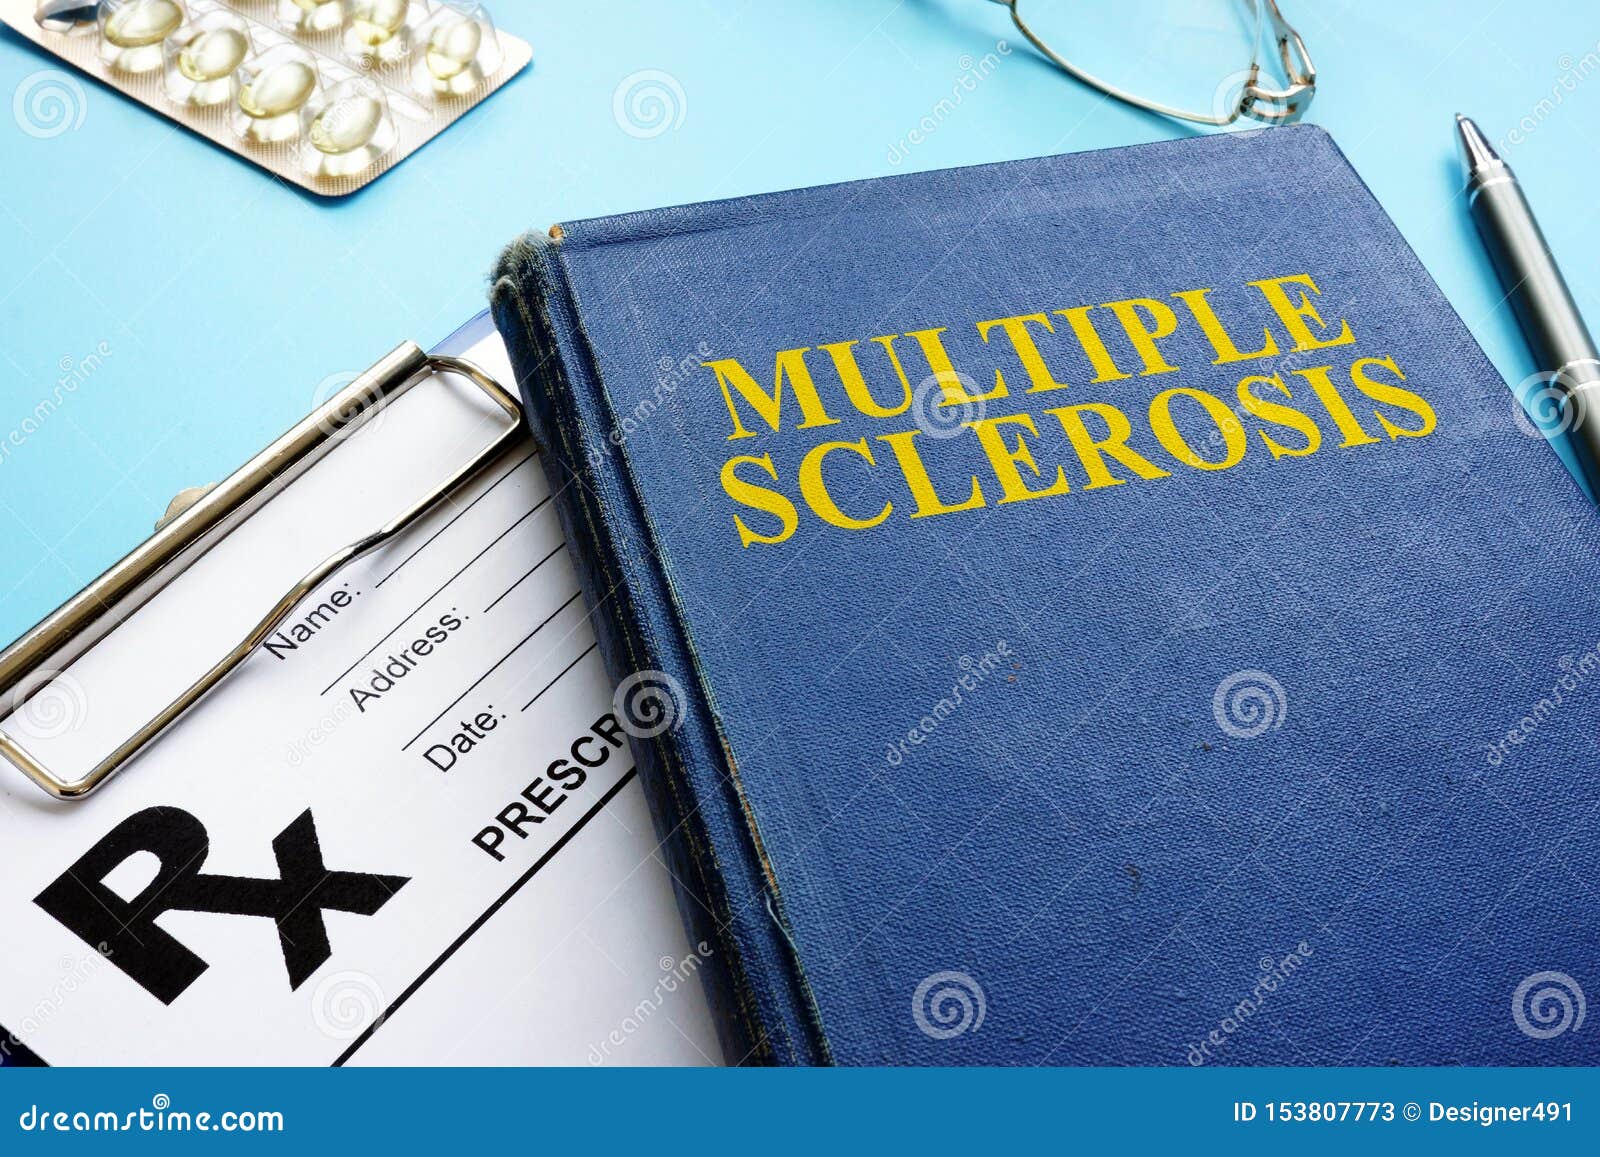 multiple sclerosis ms book and prescription